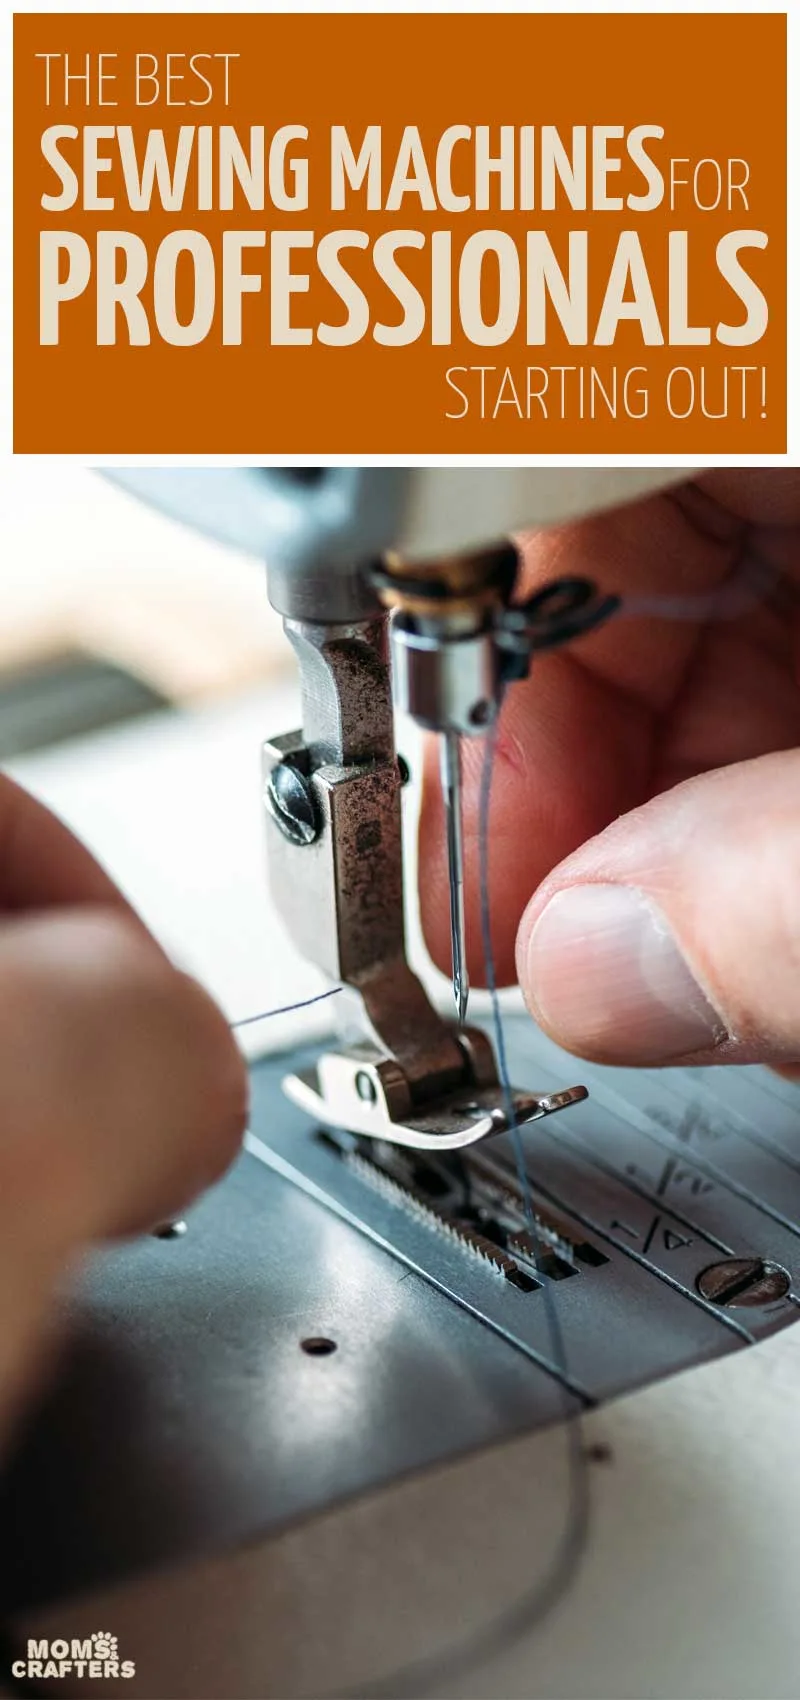 The best sewing machines for home businesses, dressmaking, and seamstresses as well as tailors - these best semi professional sewing machine options are perfect for accurate sewing and perfect seams.